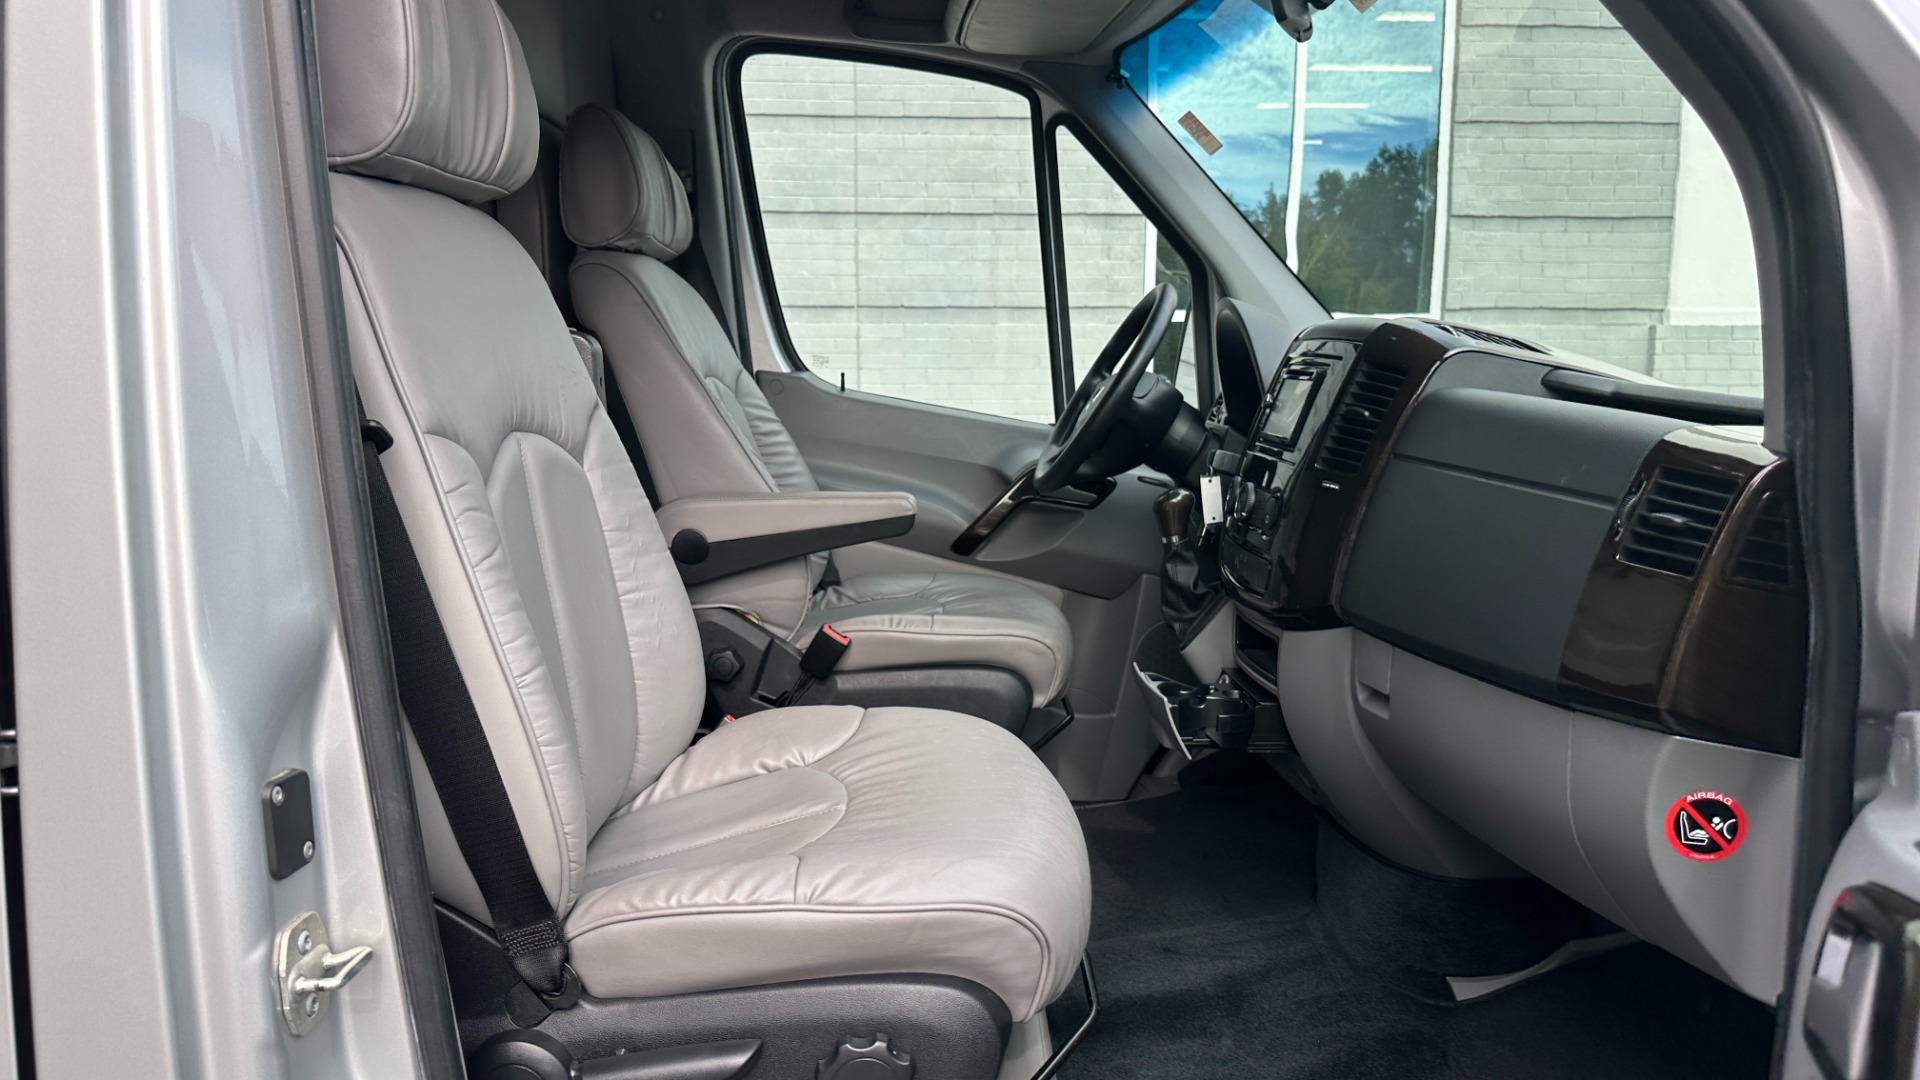 Used 2015 Mercedes-Benz Sprinter Cargo Vans EXT / MIDWEST AUTOMOTIVE DESIGN / LUXURY SPRINTER / TV'S / WIFI / MORE!! for sale $69,999 at Formula Imports in Charlotte NC 28227 31